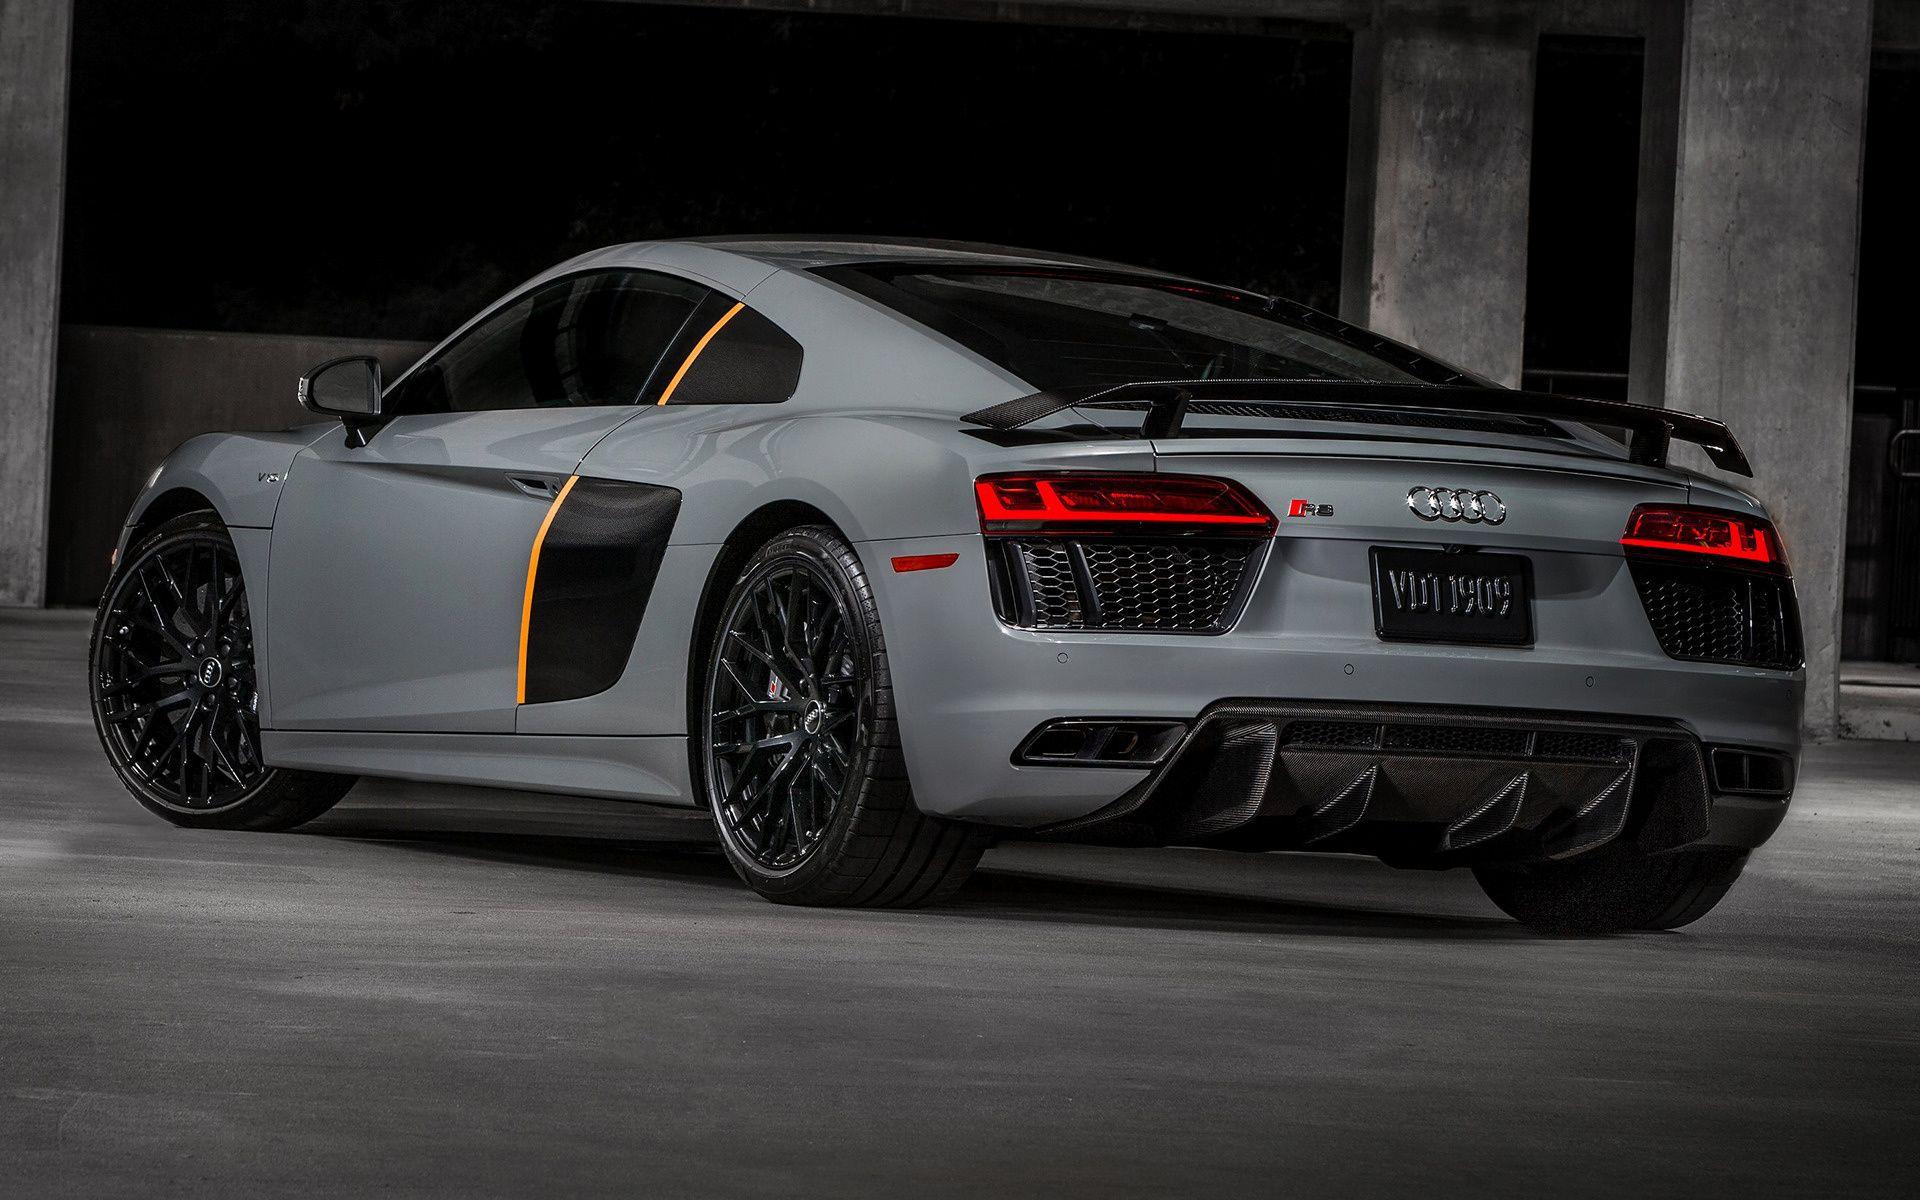 Audi R8 Wallpapers - Top Free Audi R8 Backgrounds ...